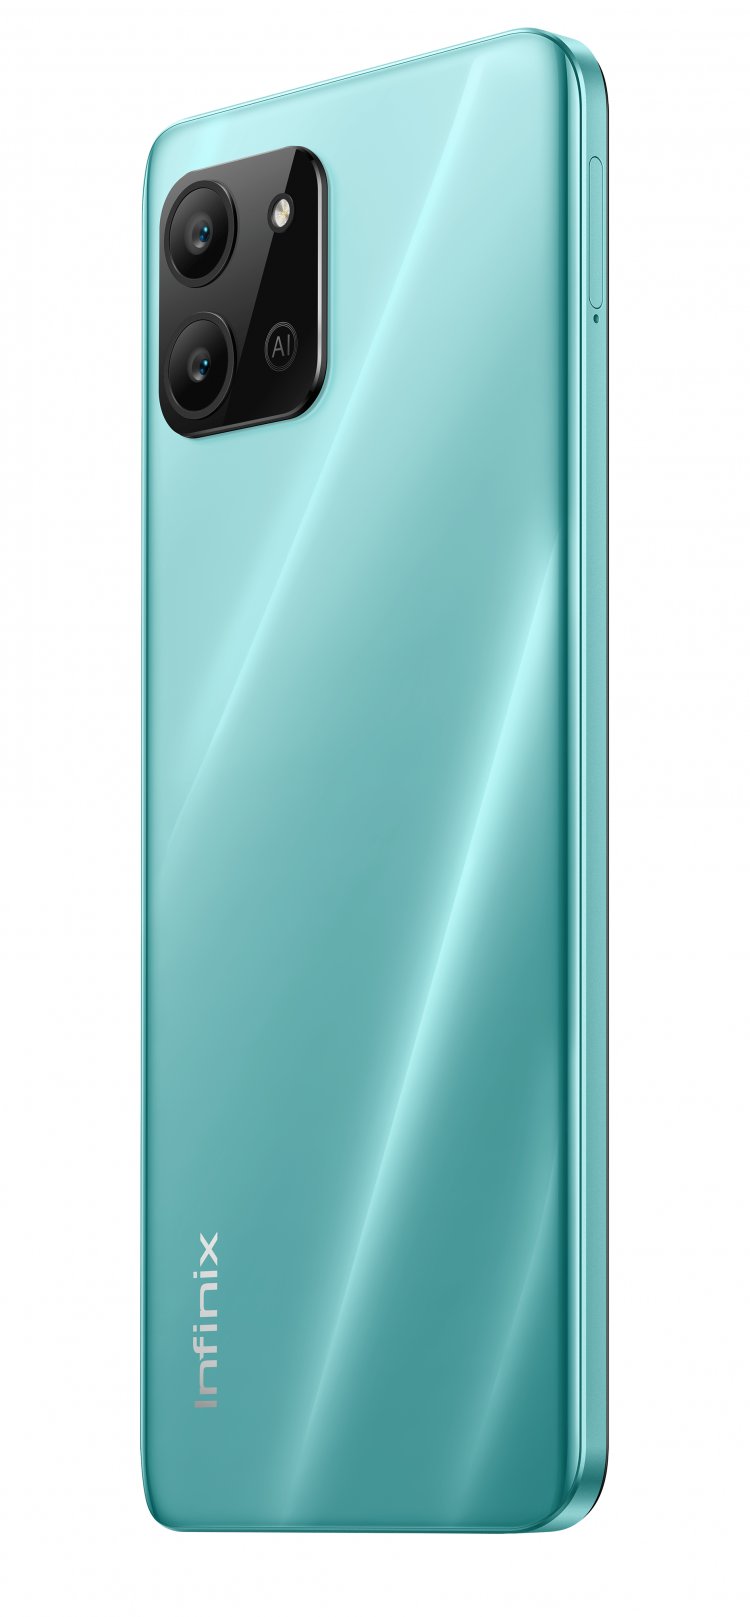 Infinix announces a latest addition to its all-rounder budget-friendly series; launches HOT 11 2022 promising Fast & Fun smartphone experience